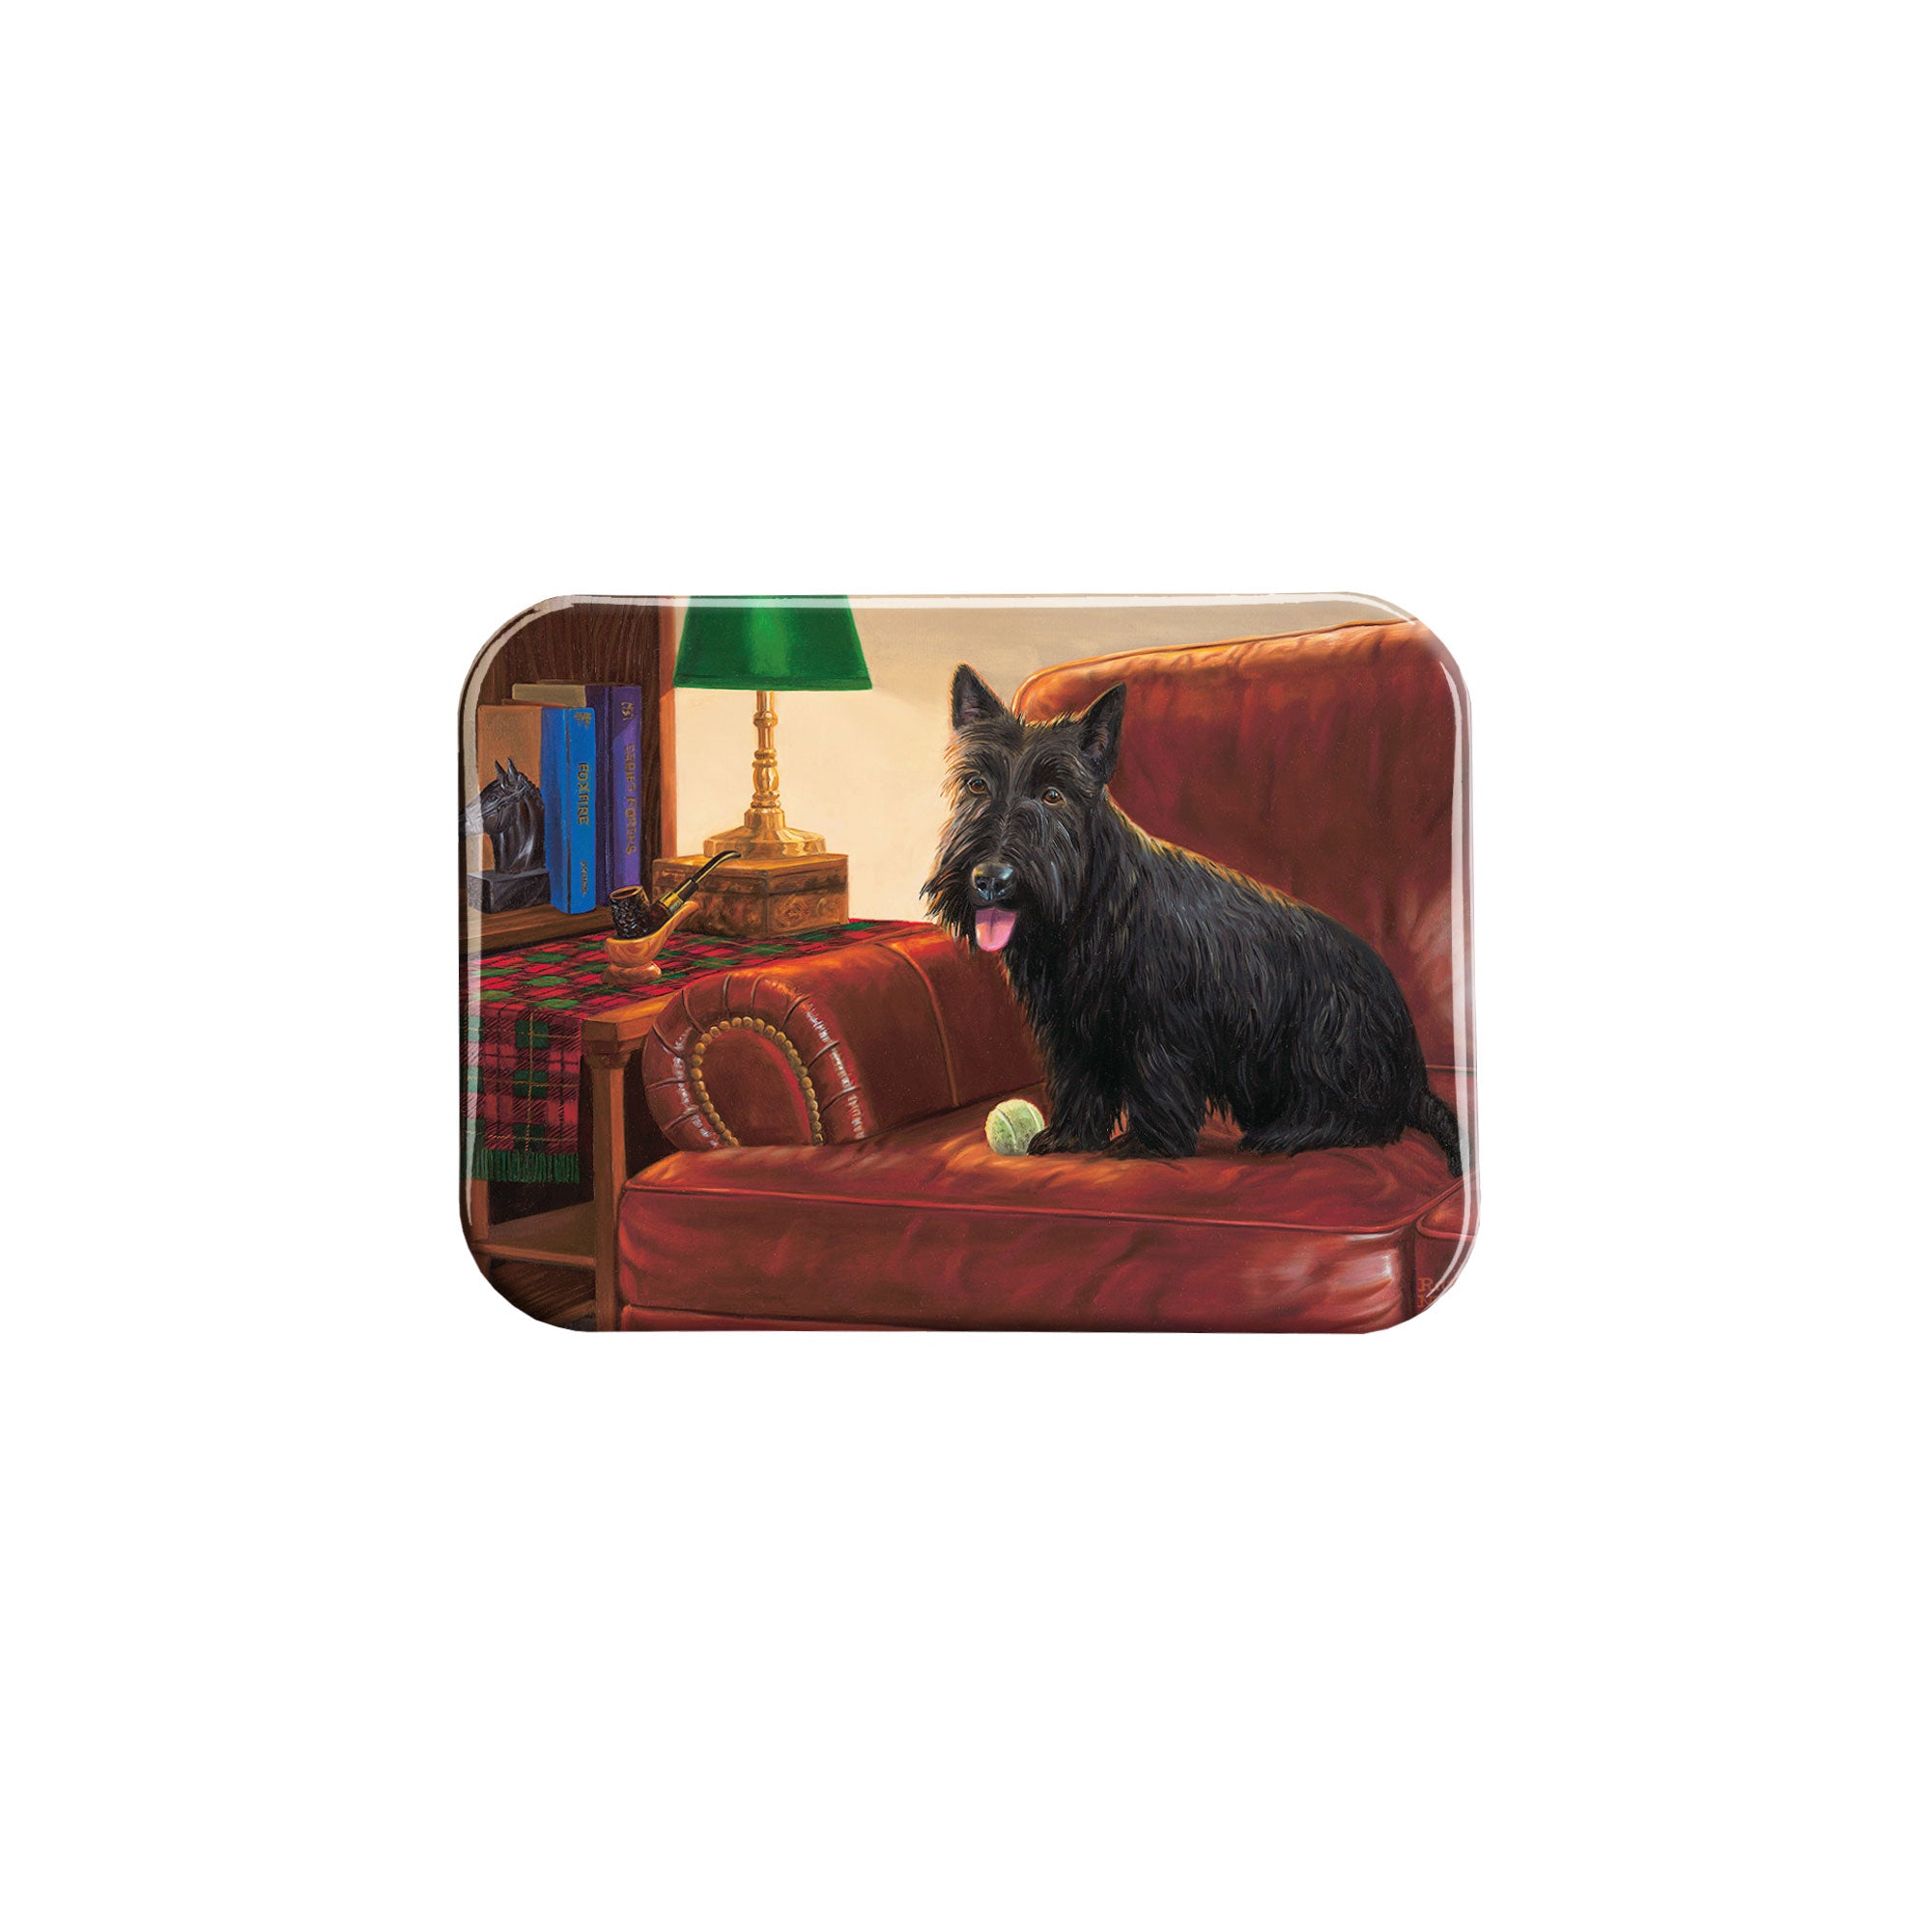 "I Rule This Couch" - 2.5" X 3.5" Rectangle Fridge Magnets